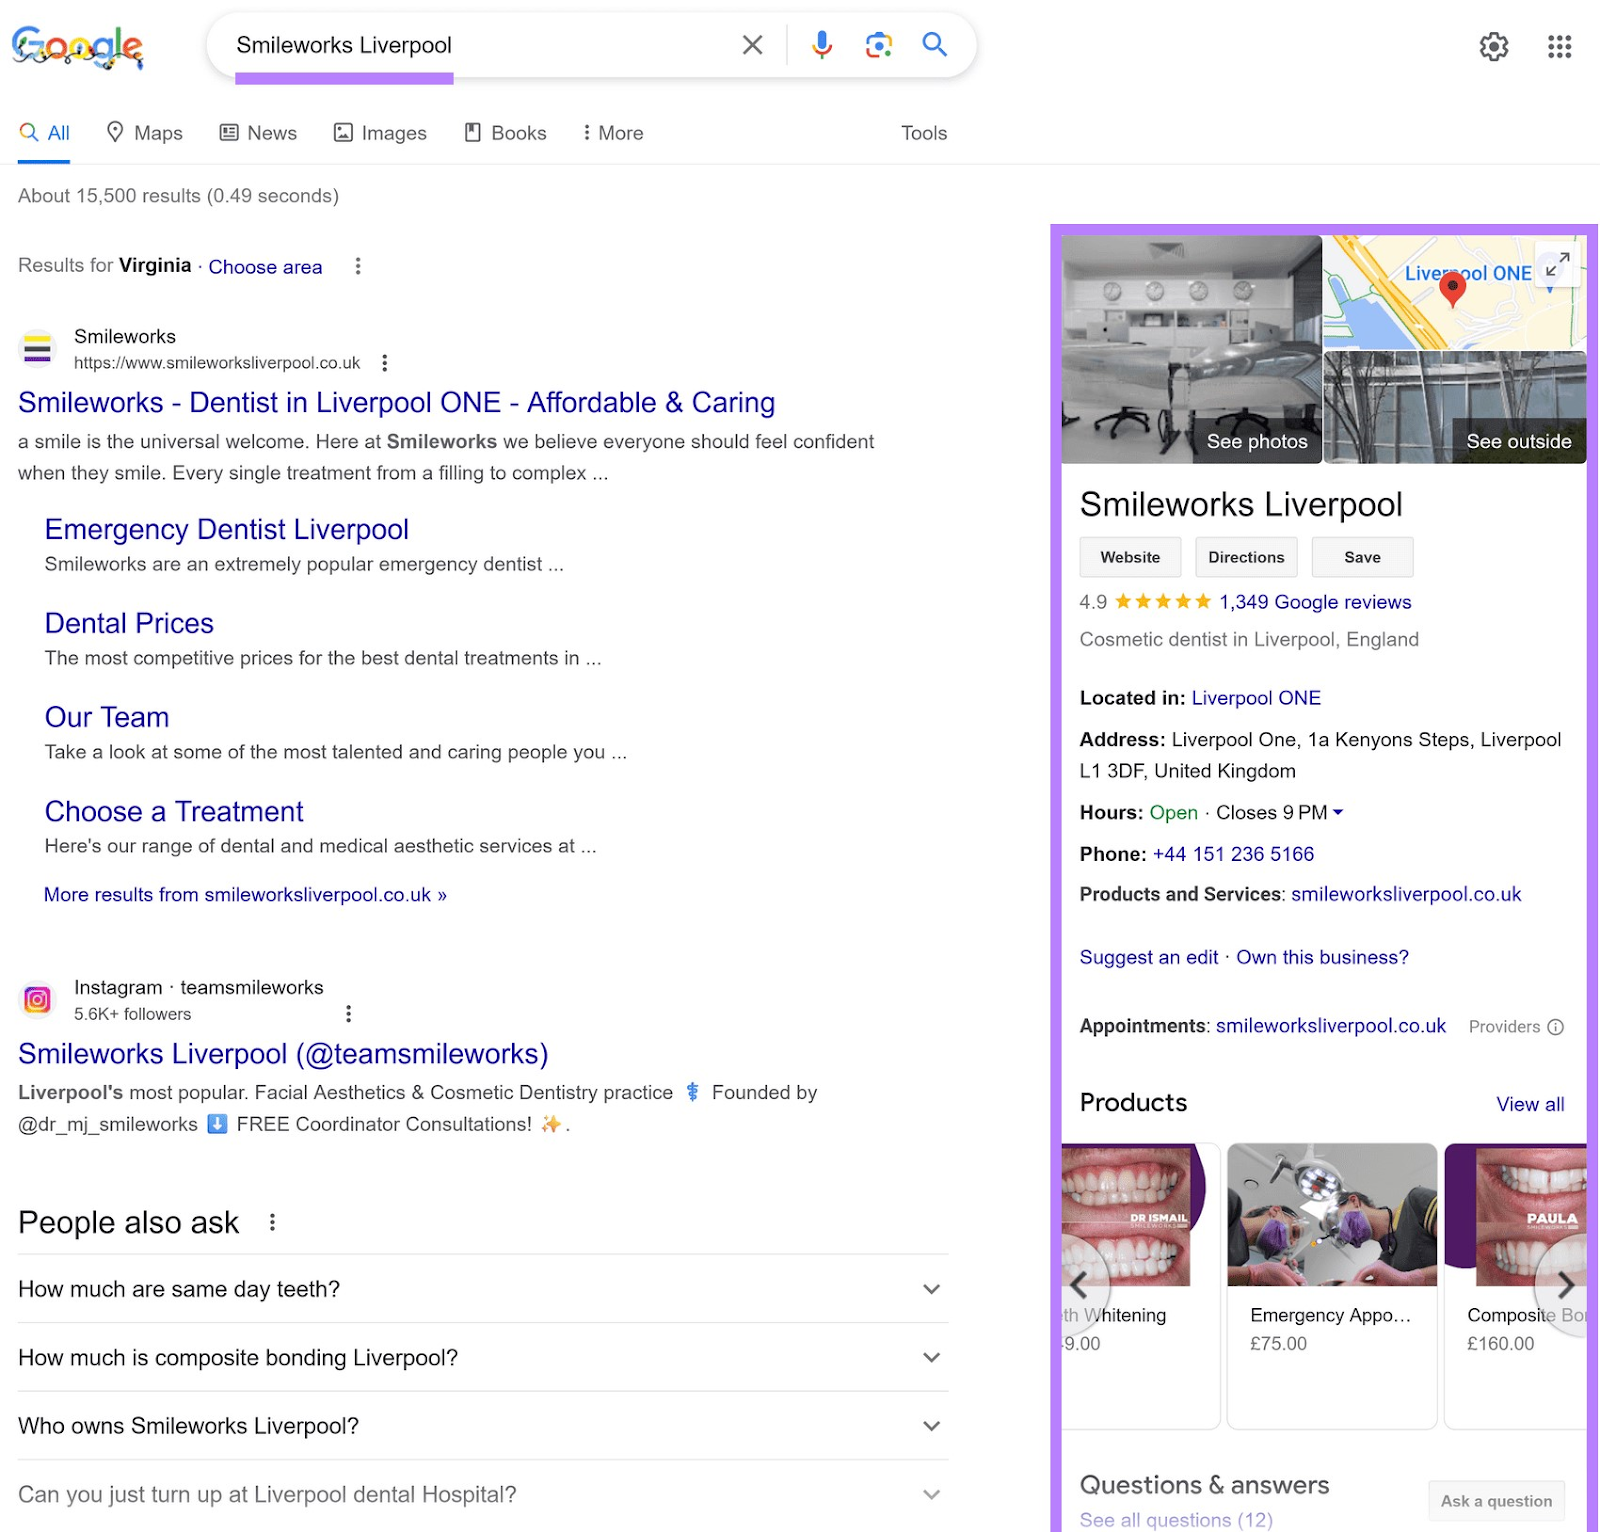 Google Business Profile for Smileworks Liverpool on SERP